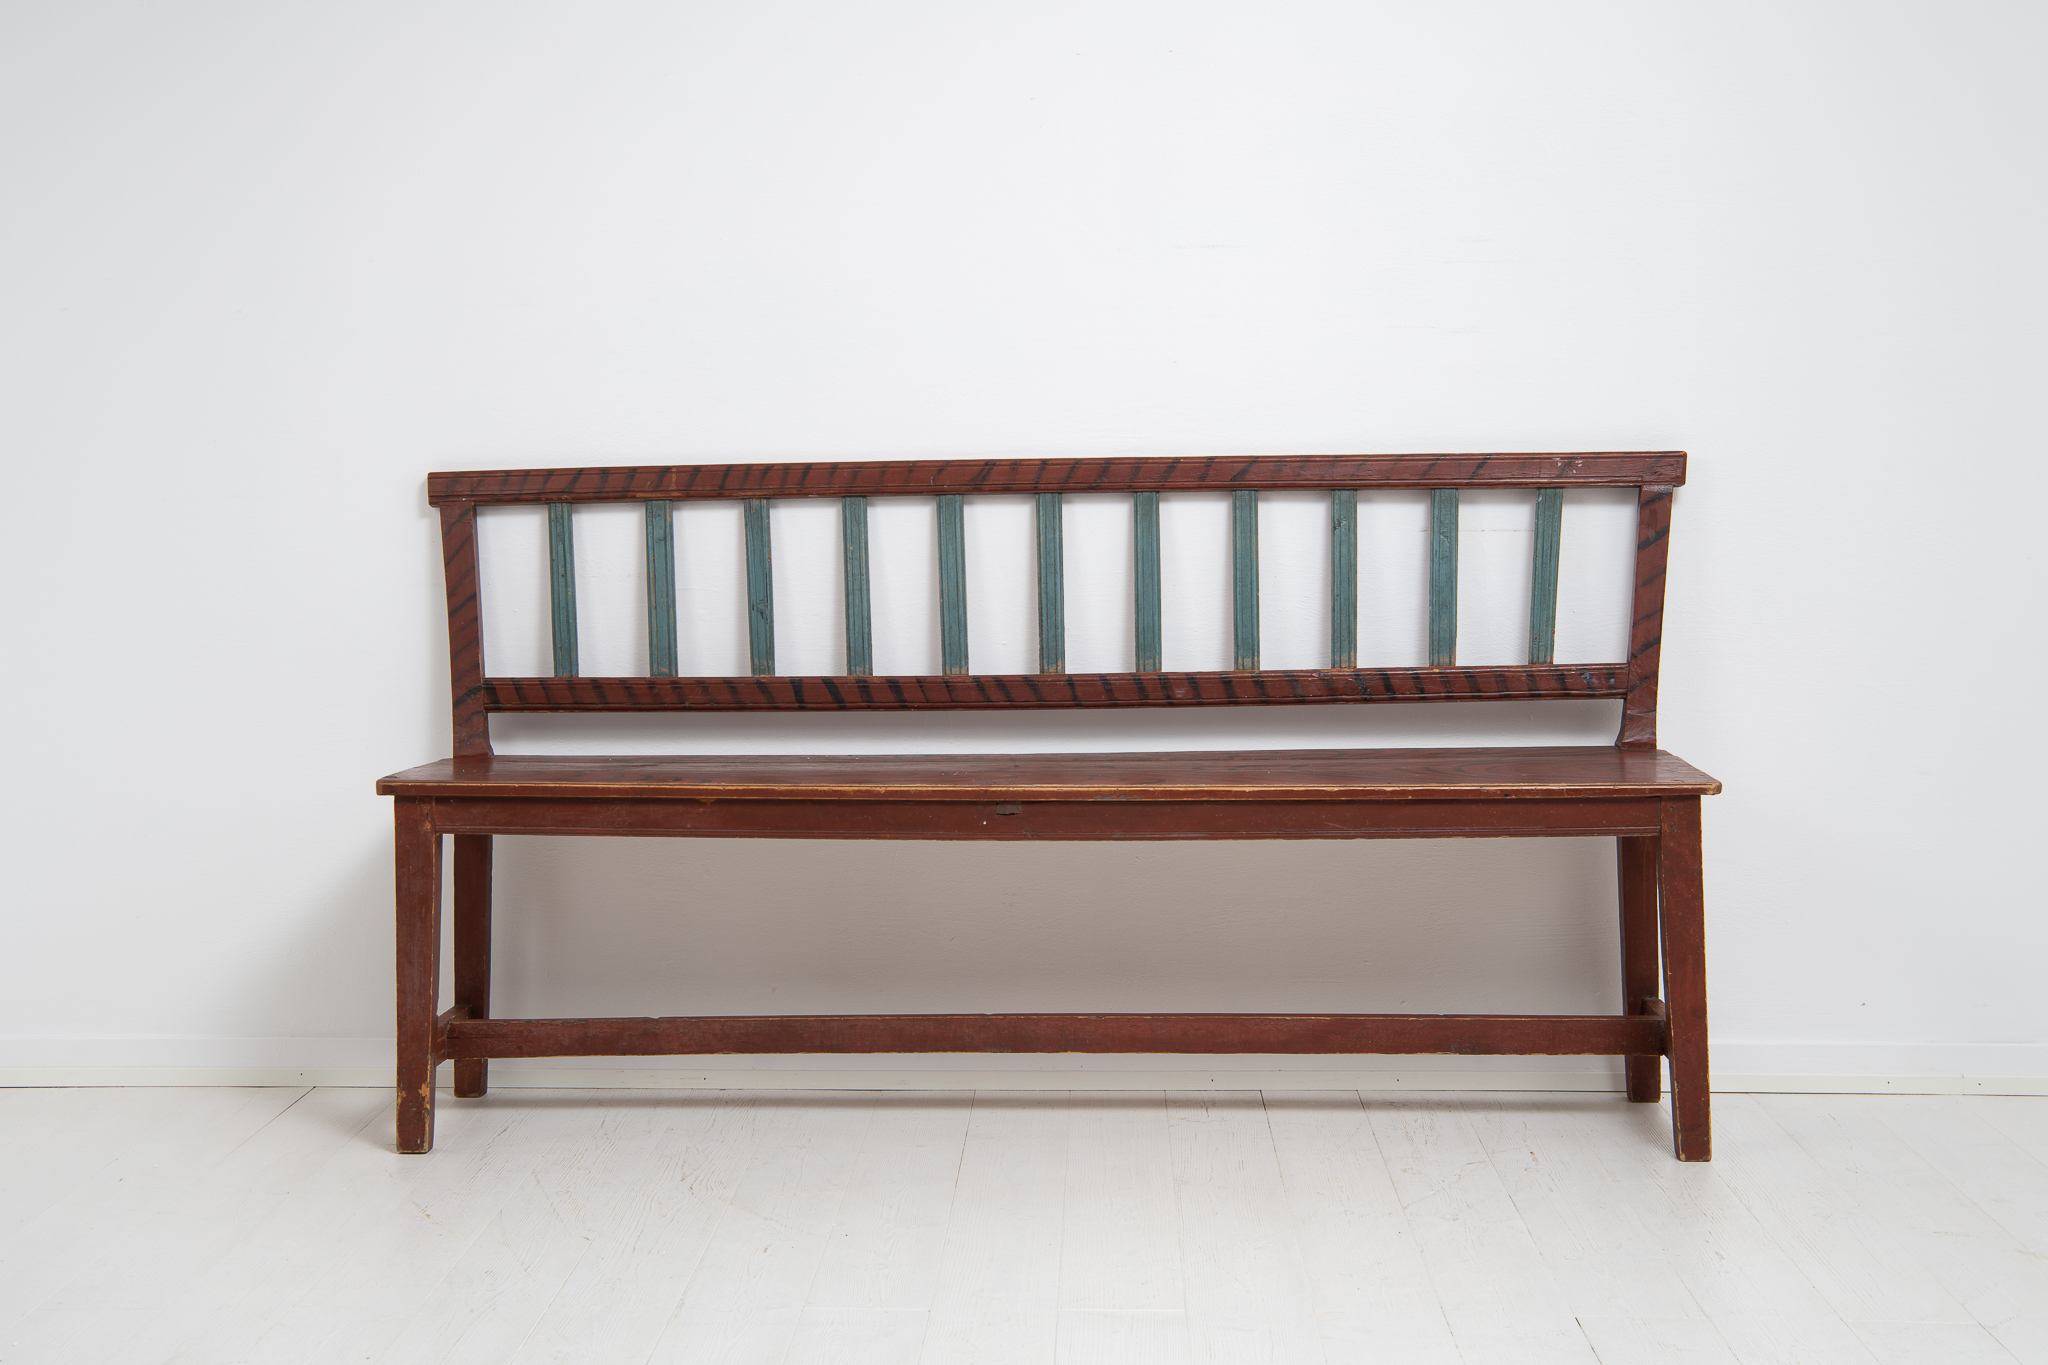 Gustavian country sofa or bench from the early 19th century. The sofa is a country house furniture in folk art with an unusual straight shape